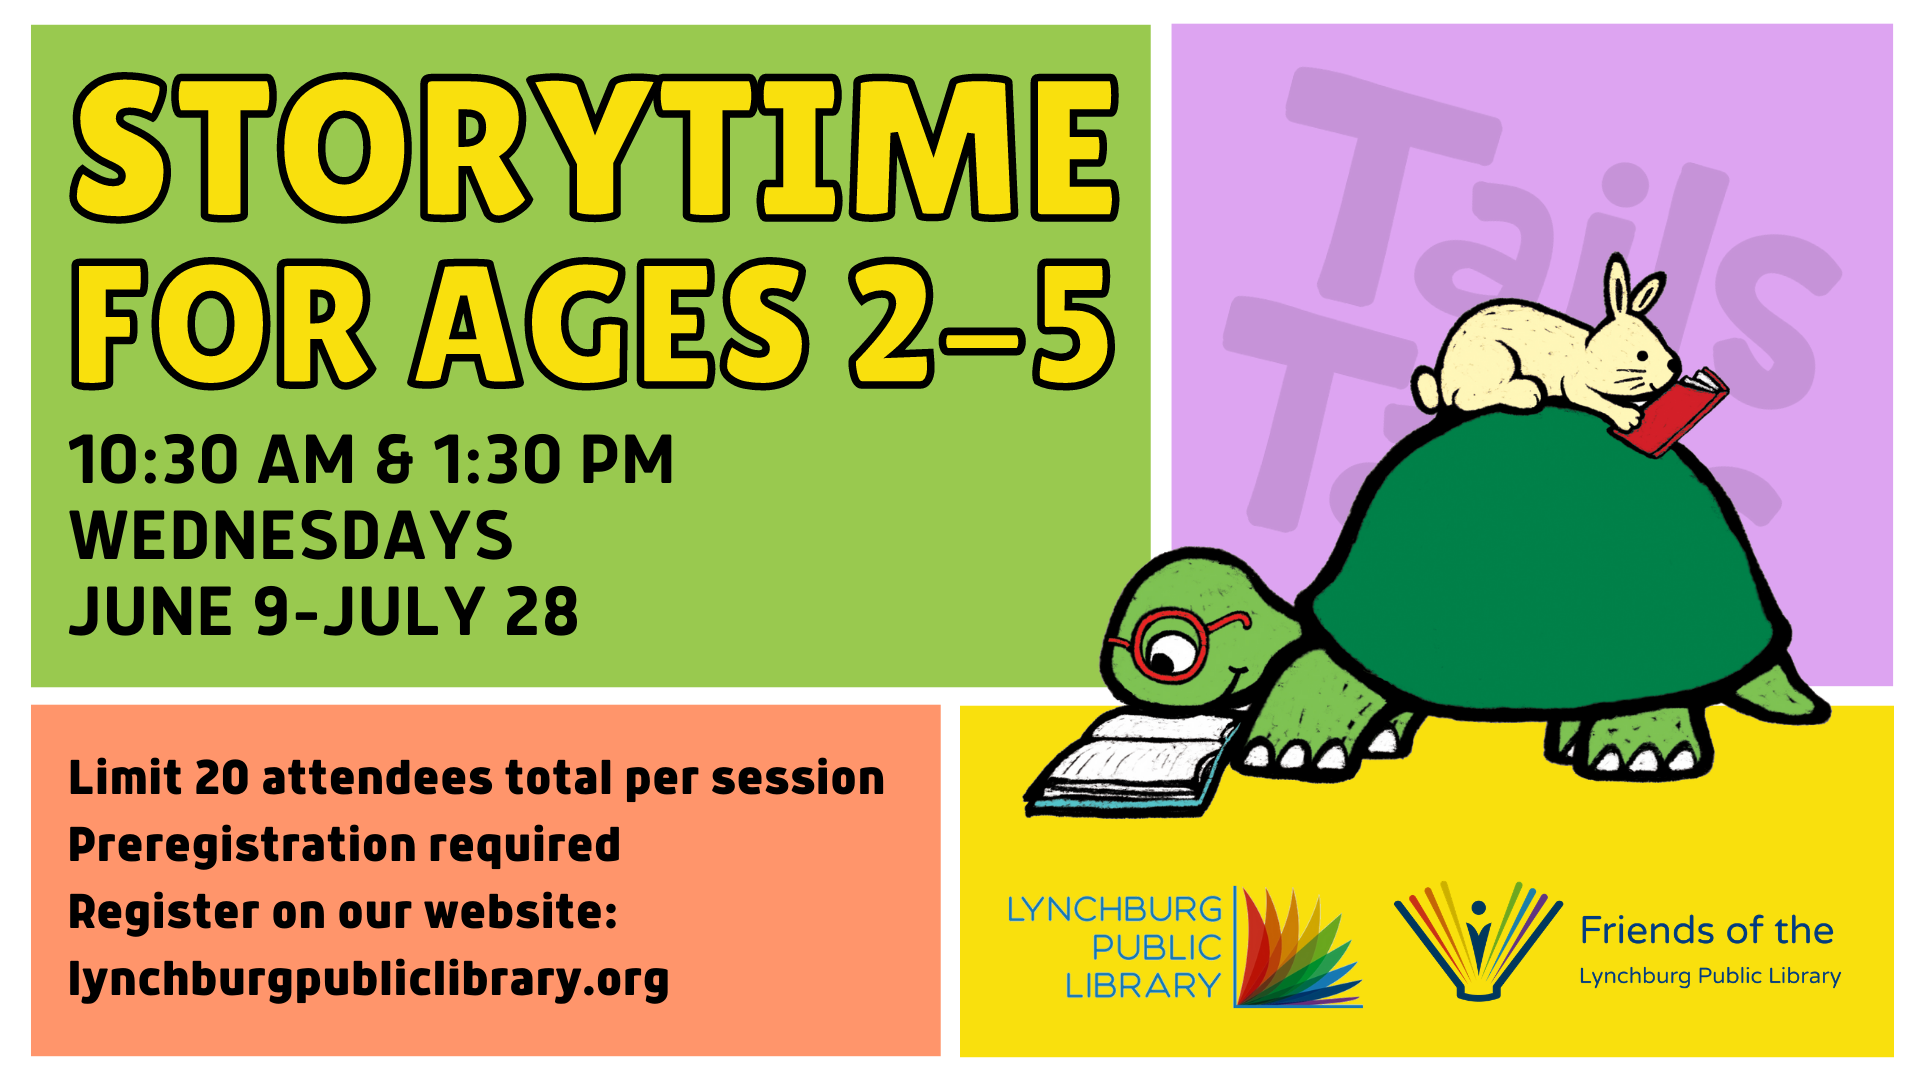 Storytime for Ages 2-5